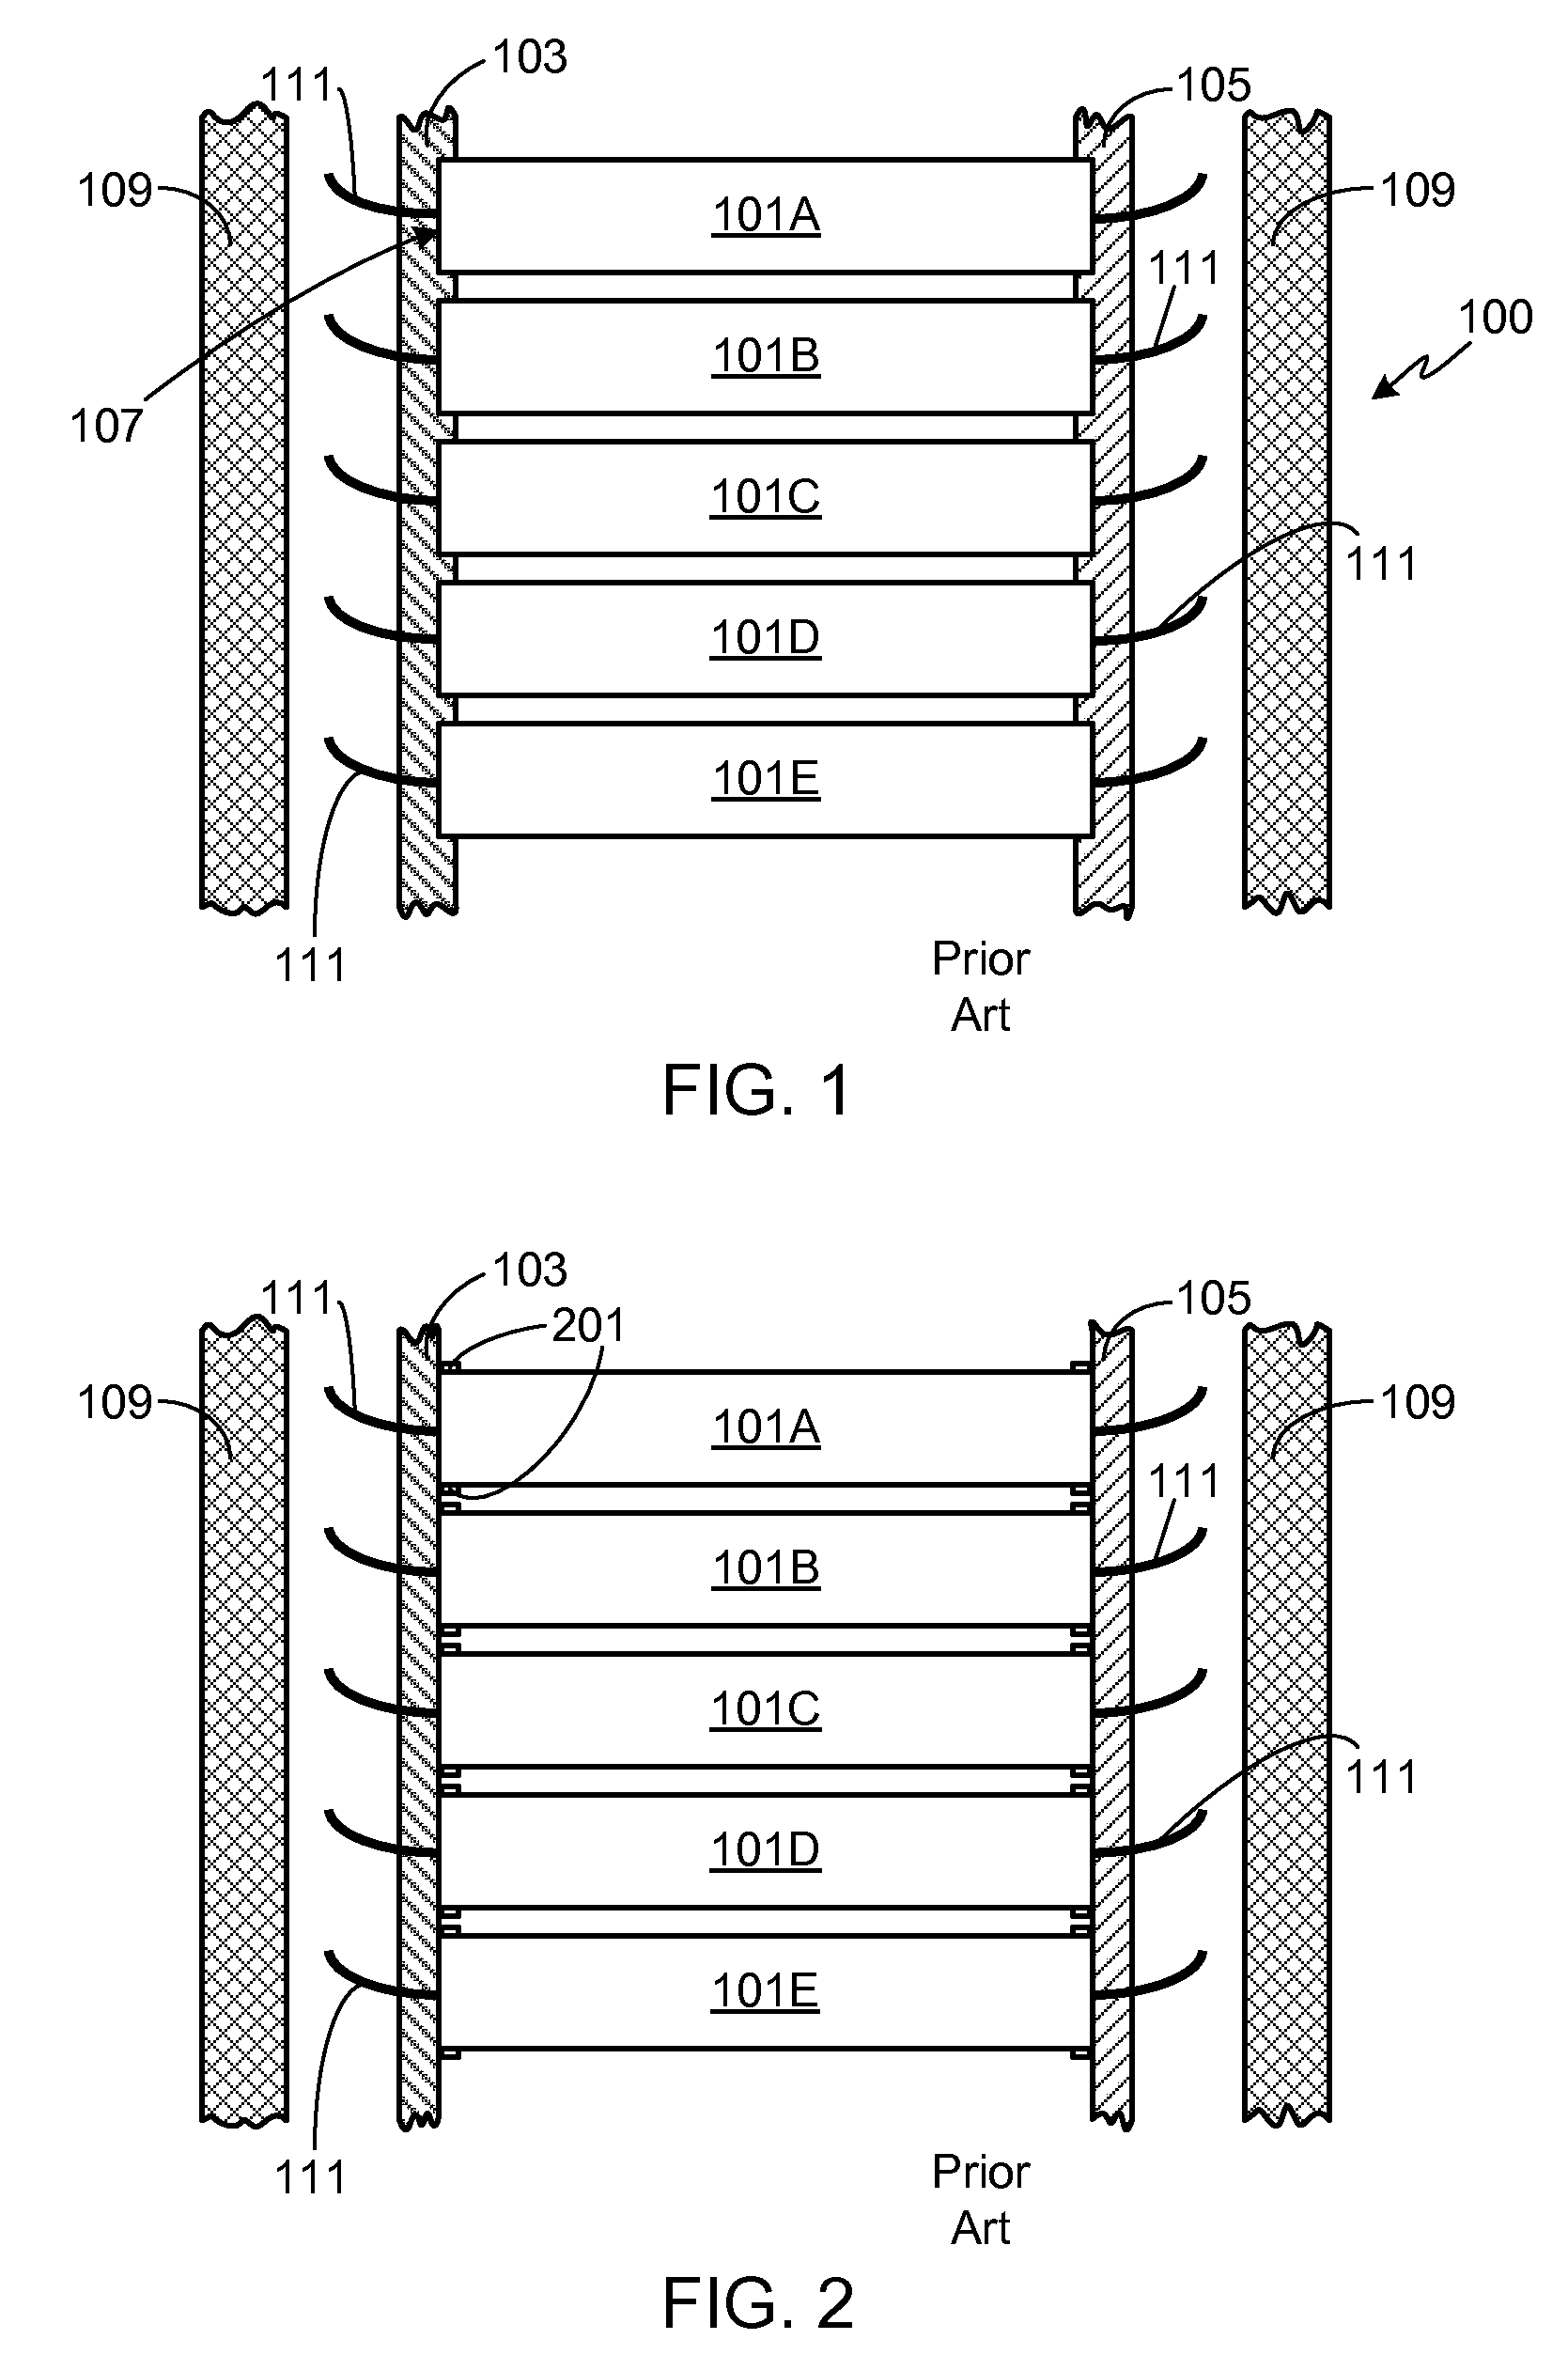 Cell Separator for Minimizing Thermal Runaway Propagation within a Battery Pack